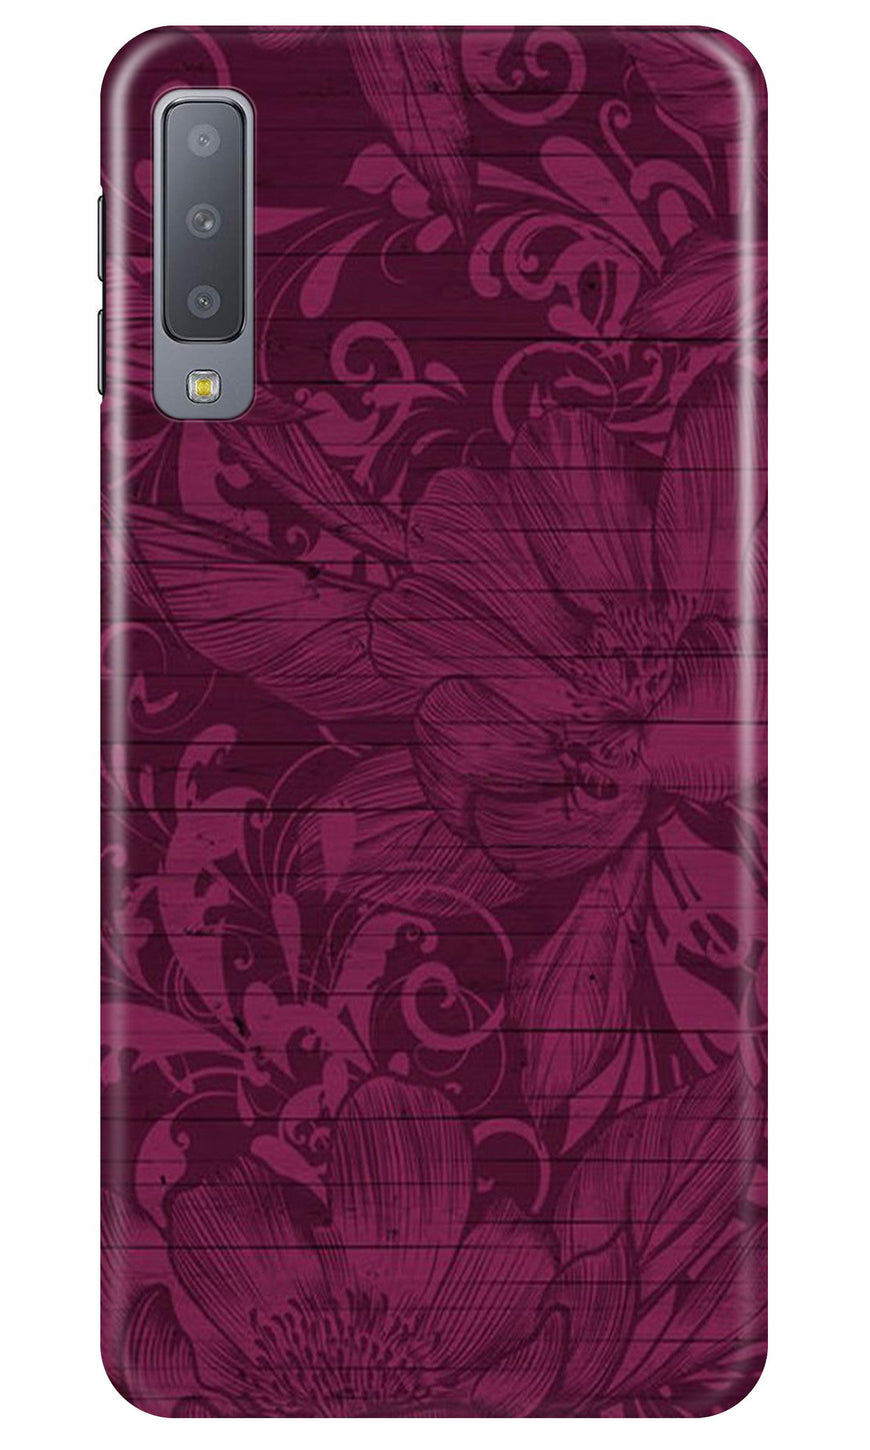 Purple Backround Case for Galaxy A7 (2018)